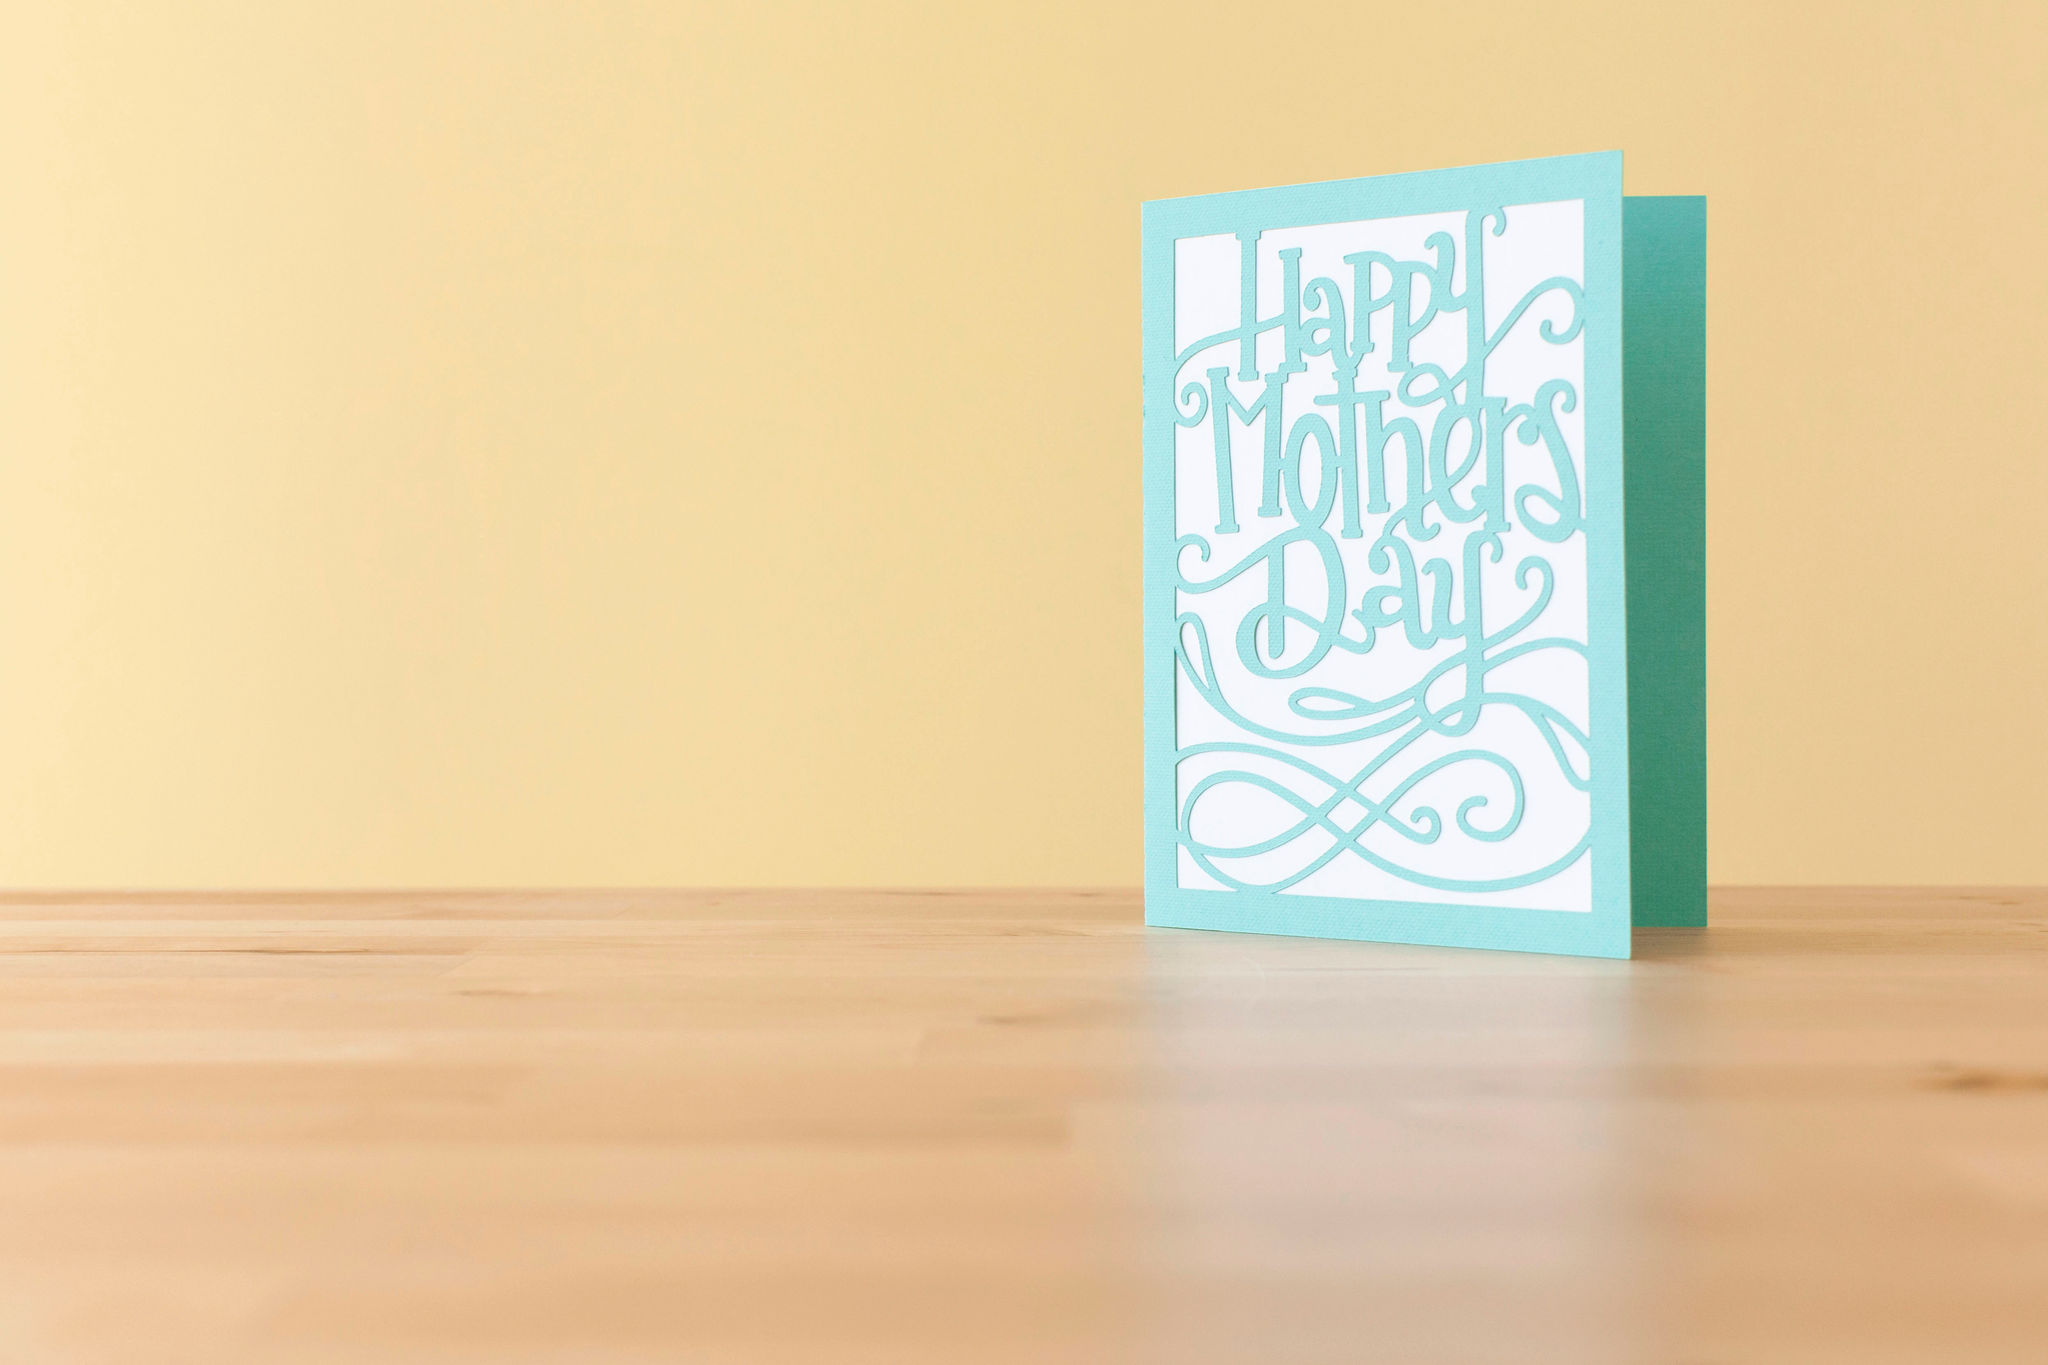 Happy Mother's Day card with white and teal cardstock.